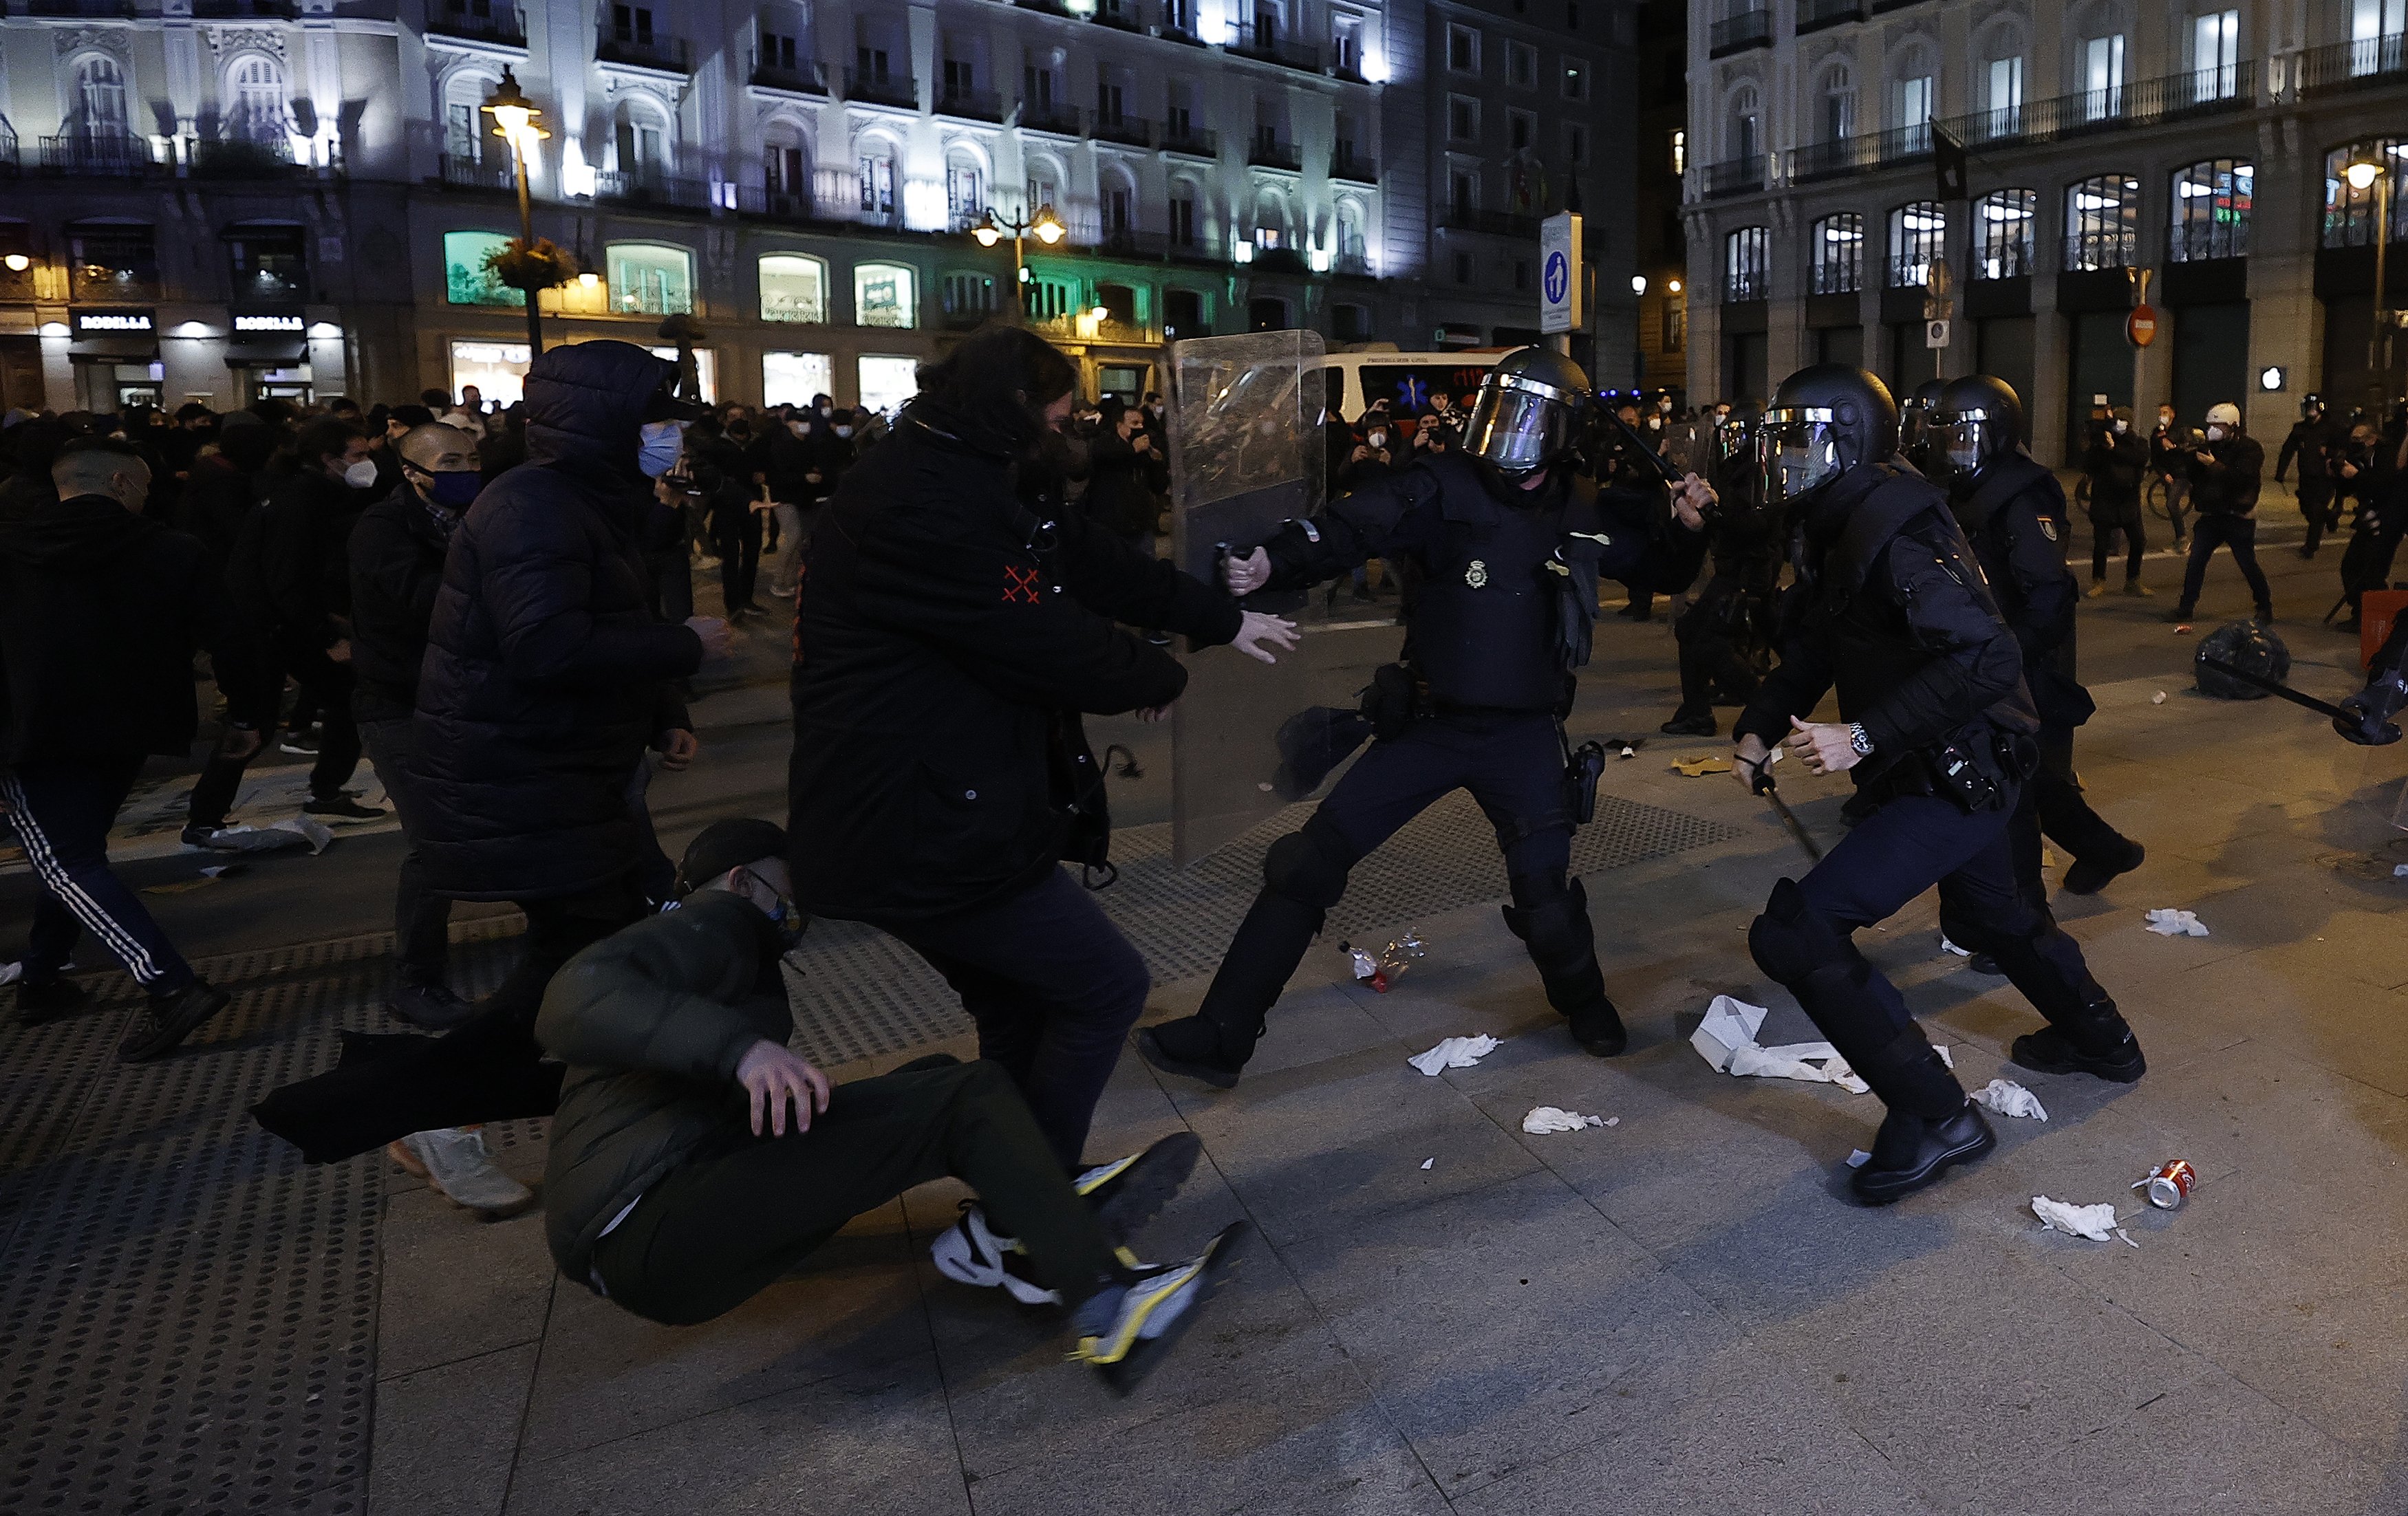 Spain sees second night of rioting after rappers arrest